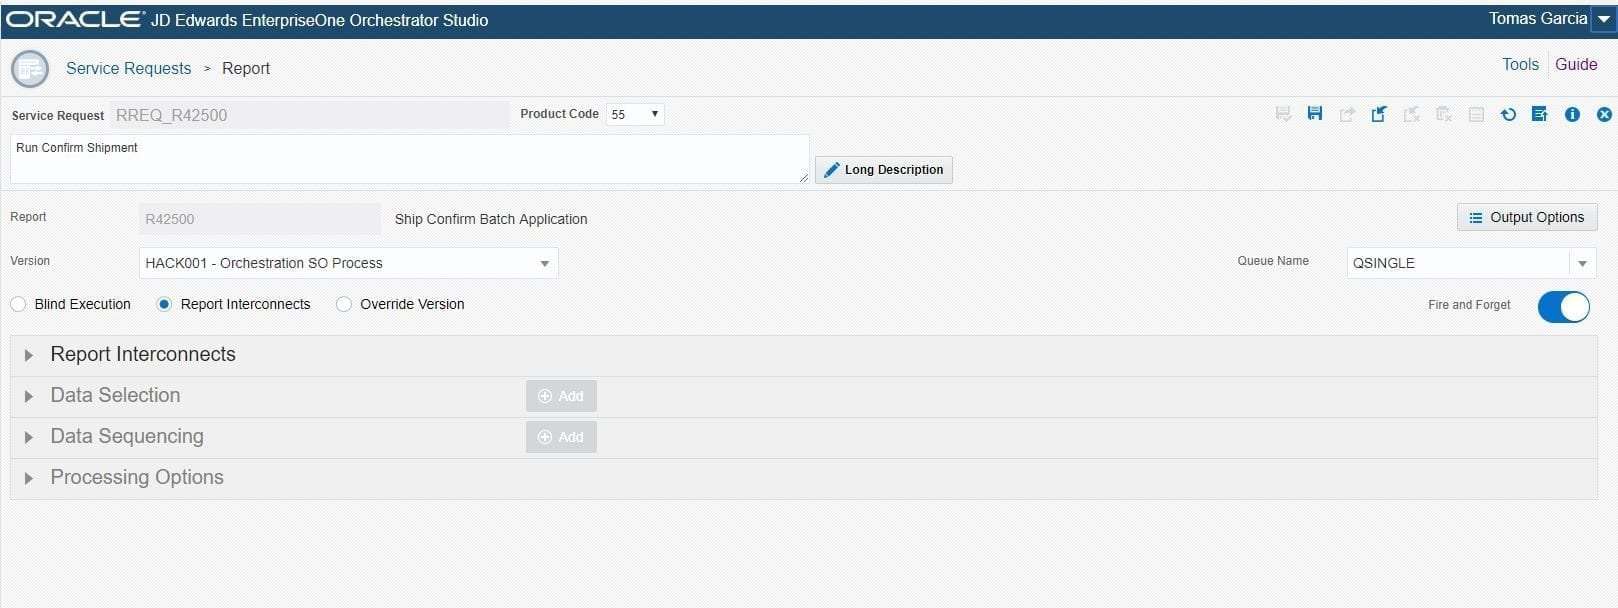 Sales Order Process Automation with JD Edwards EnterpriseOne Orchestrator